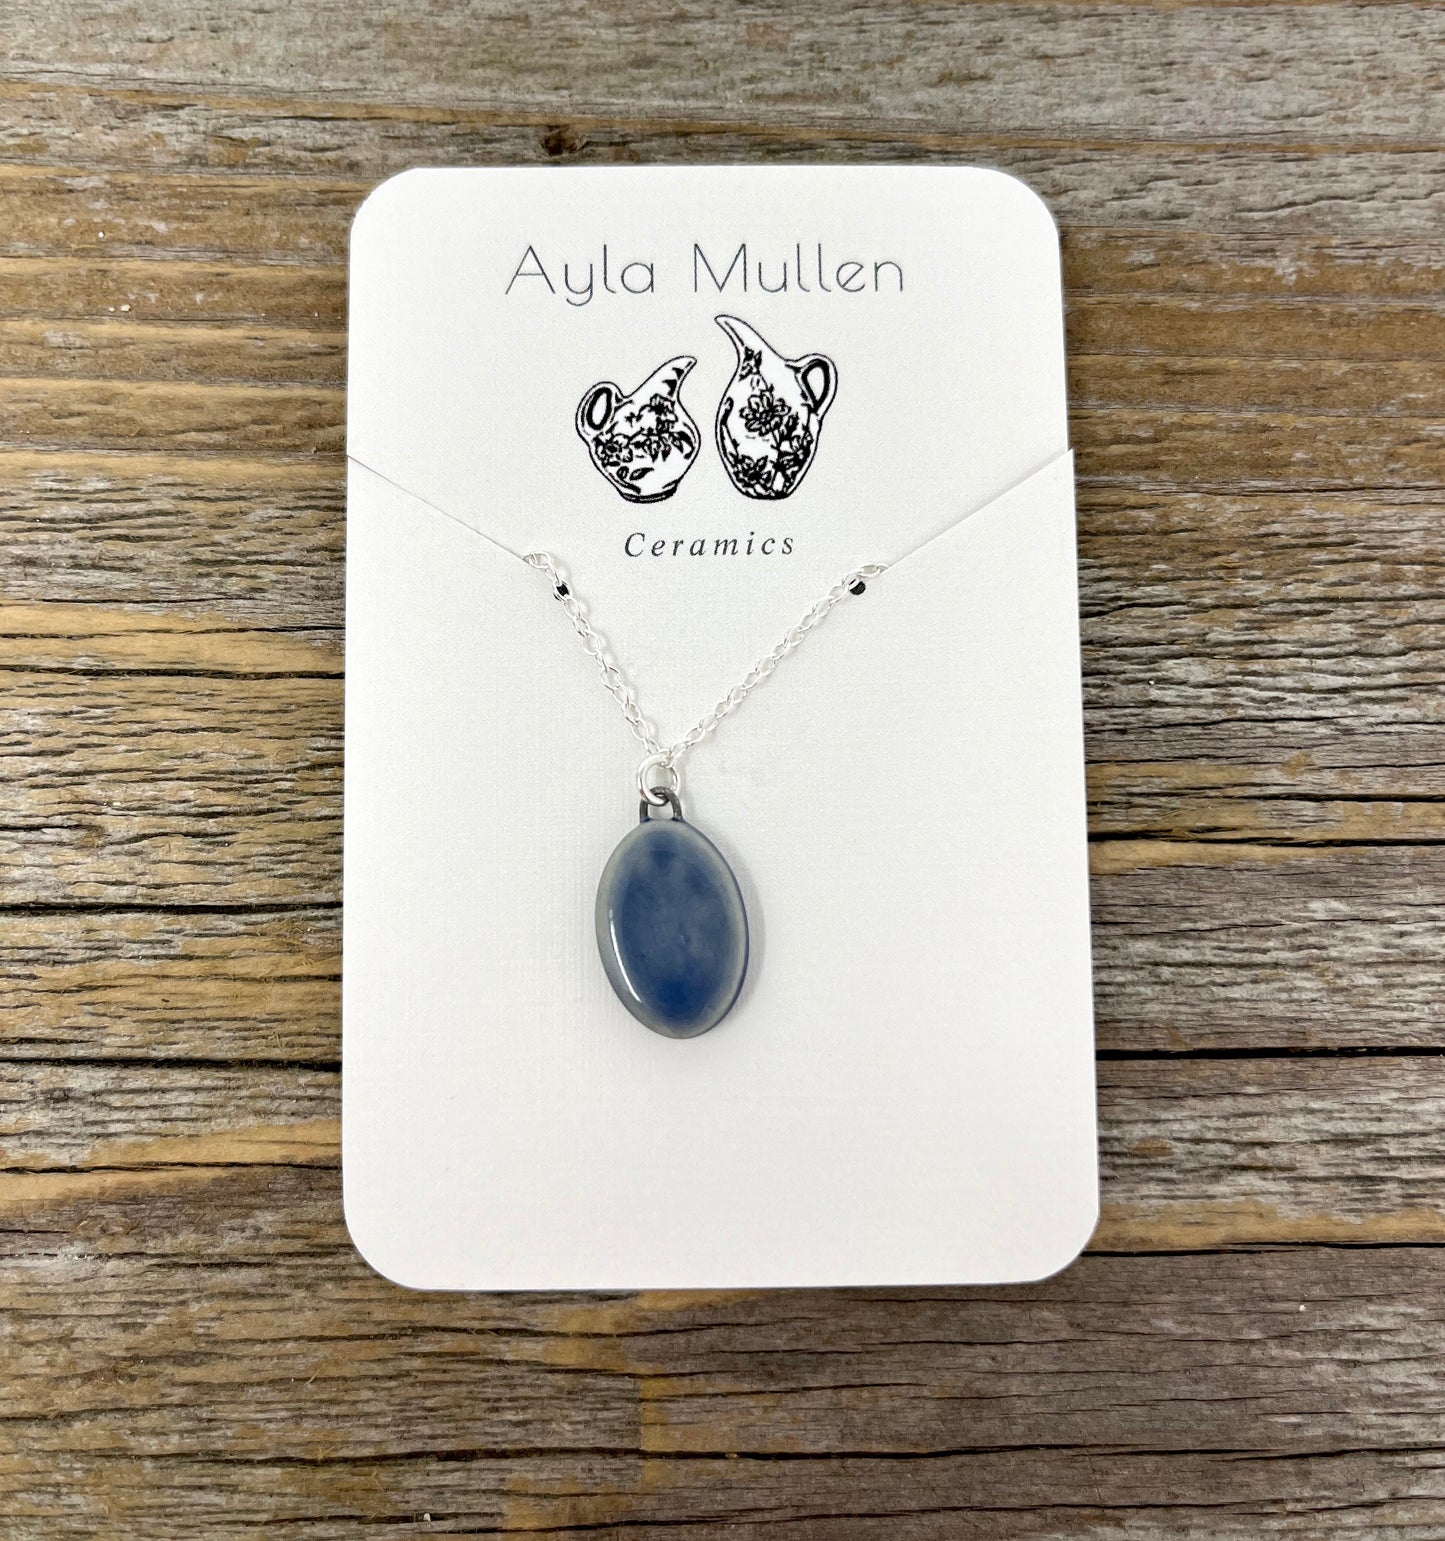 Blue Oval Necklace on Sterling Silver